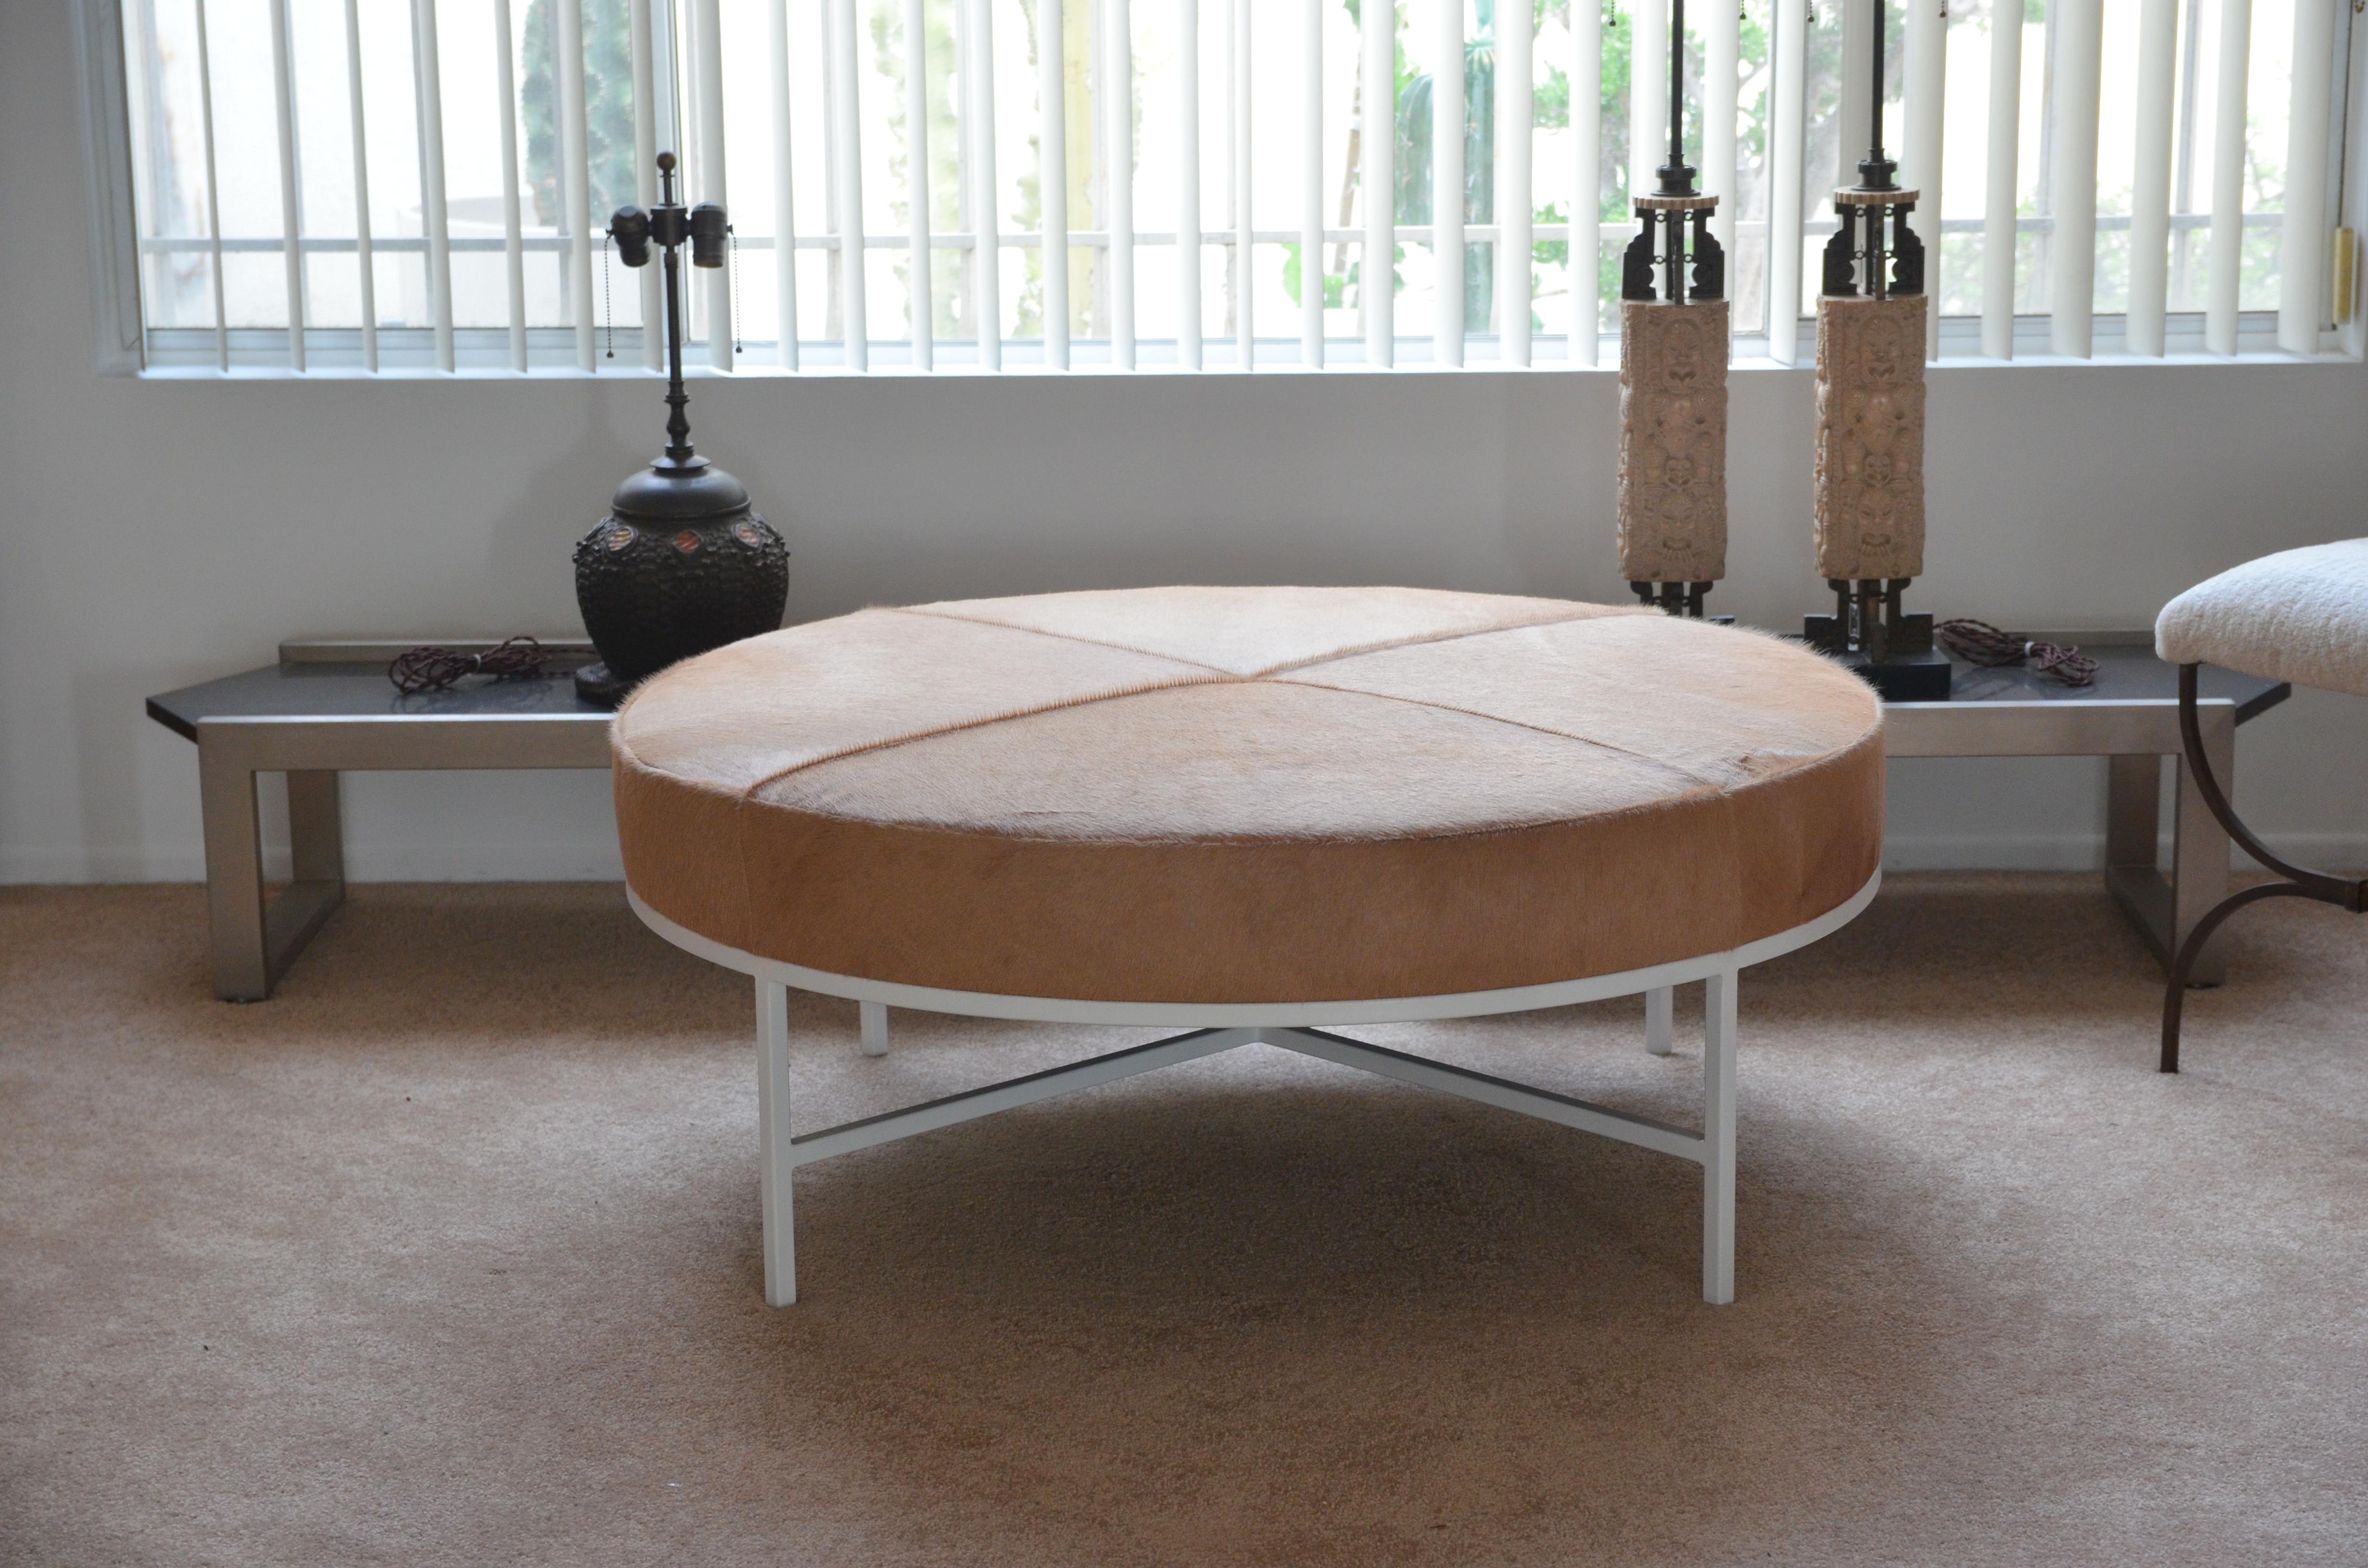 Powder-Coated White and Beige Hide 'Tambour' Ottoman or Coffee Table by Design Frères For Sale